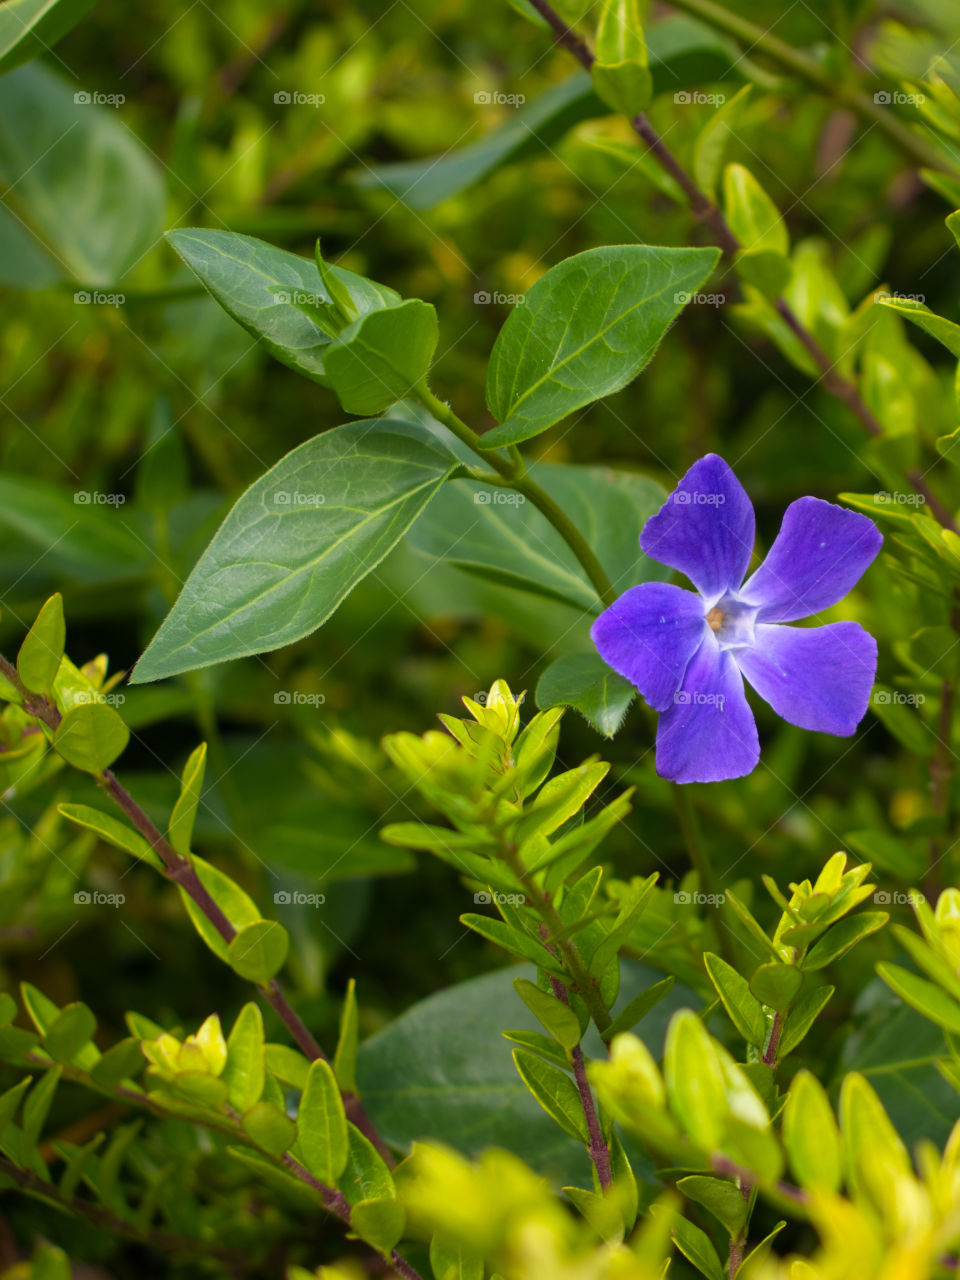 Periwinkle flower in the foliage